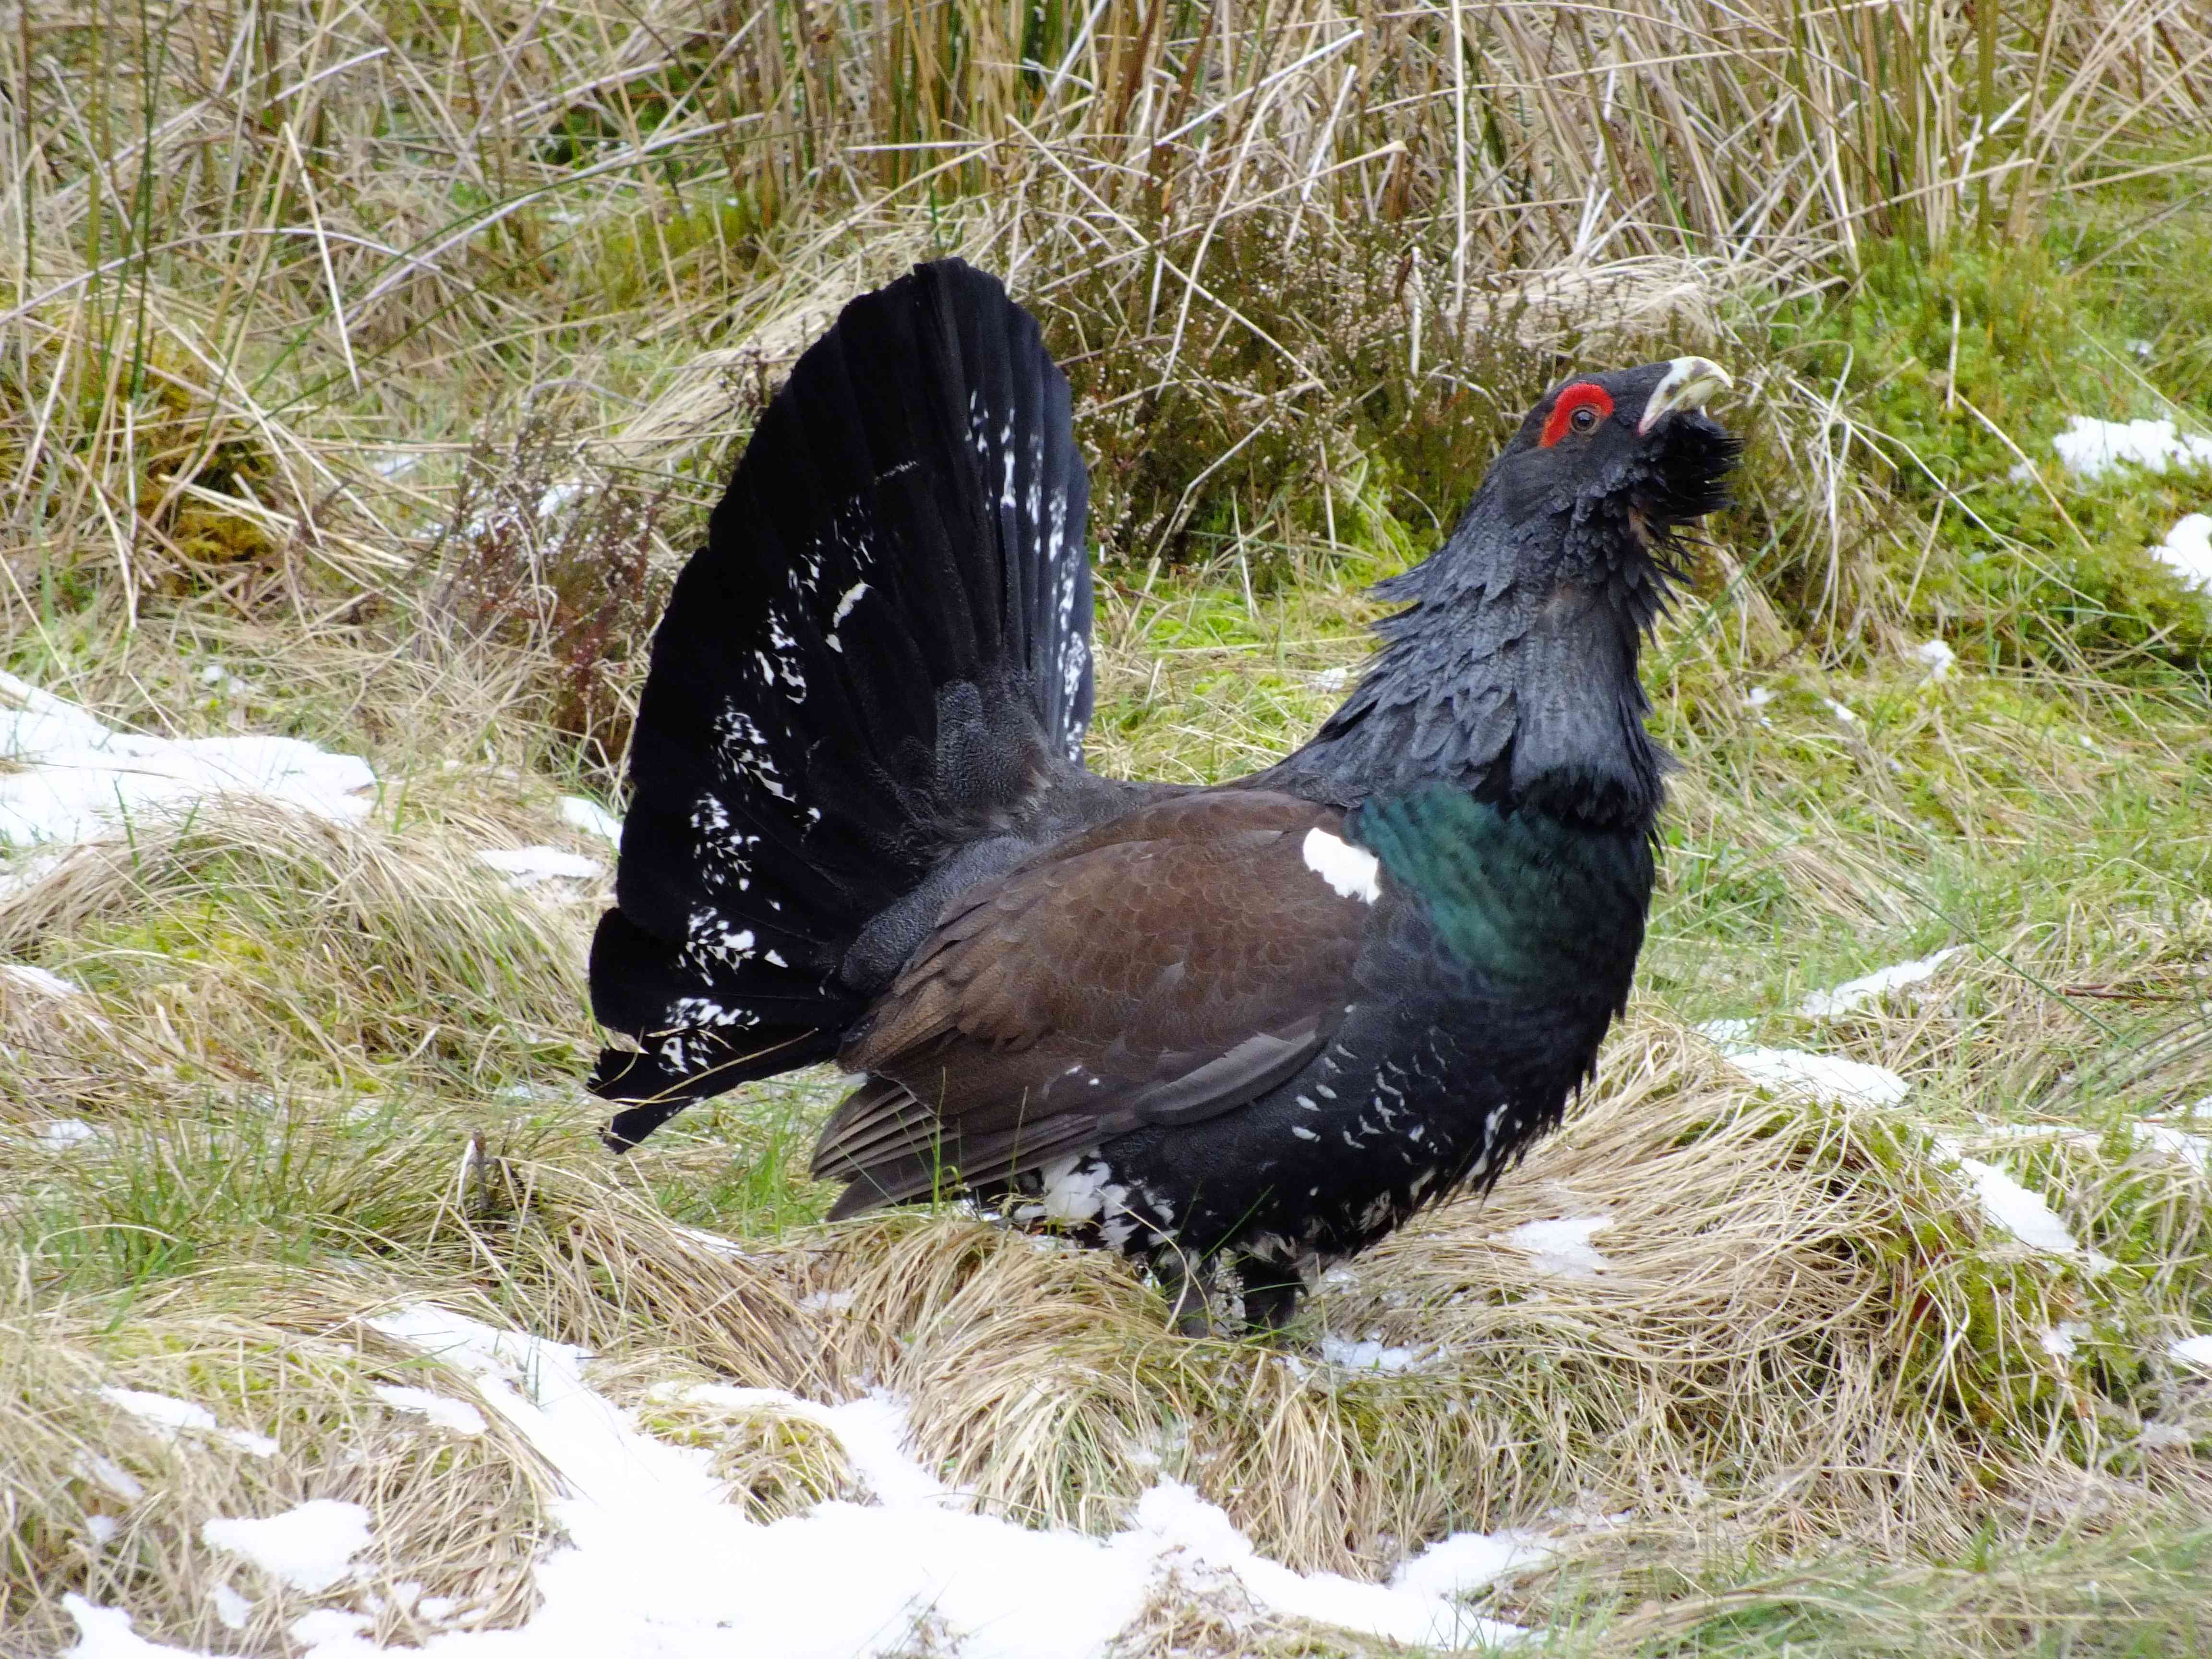 A capercaillie male in snowy grass